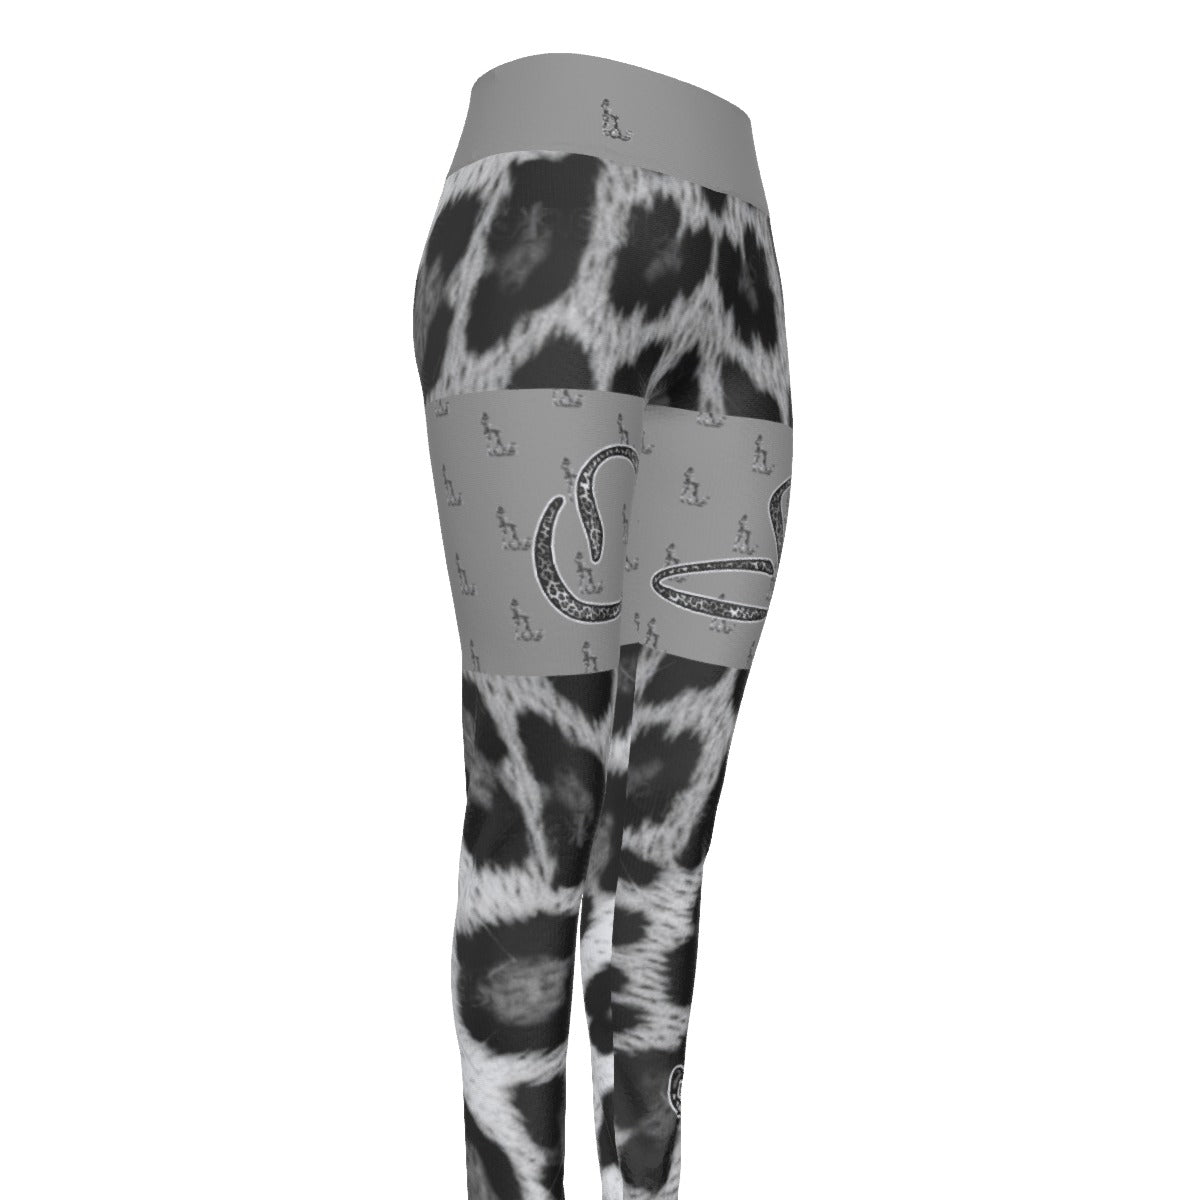 Officially Sexy Snow Leopard Print Collection Women's Grey High Waist Thigh High Booty Popper Leggings #2 (English) 2